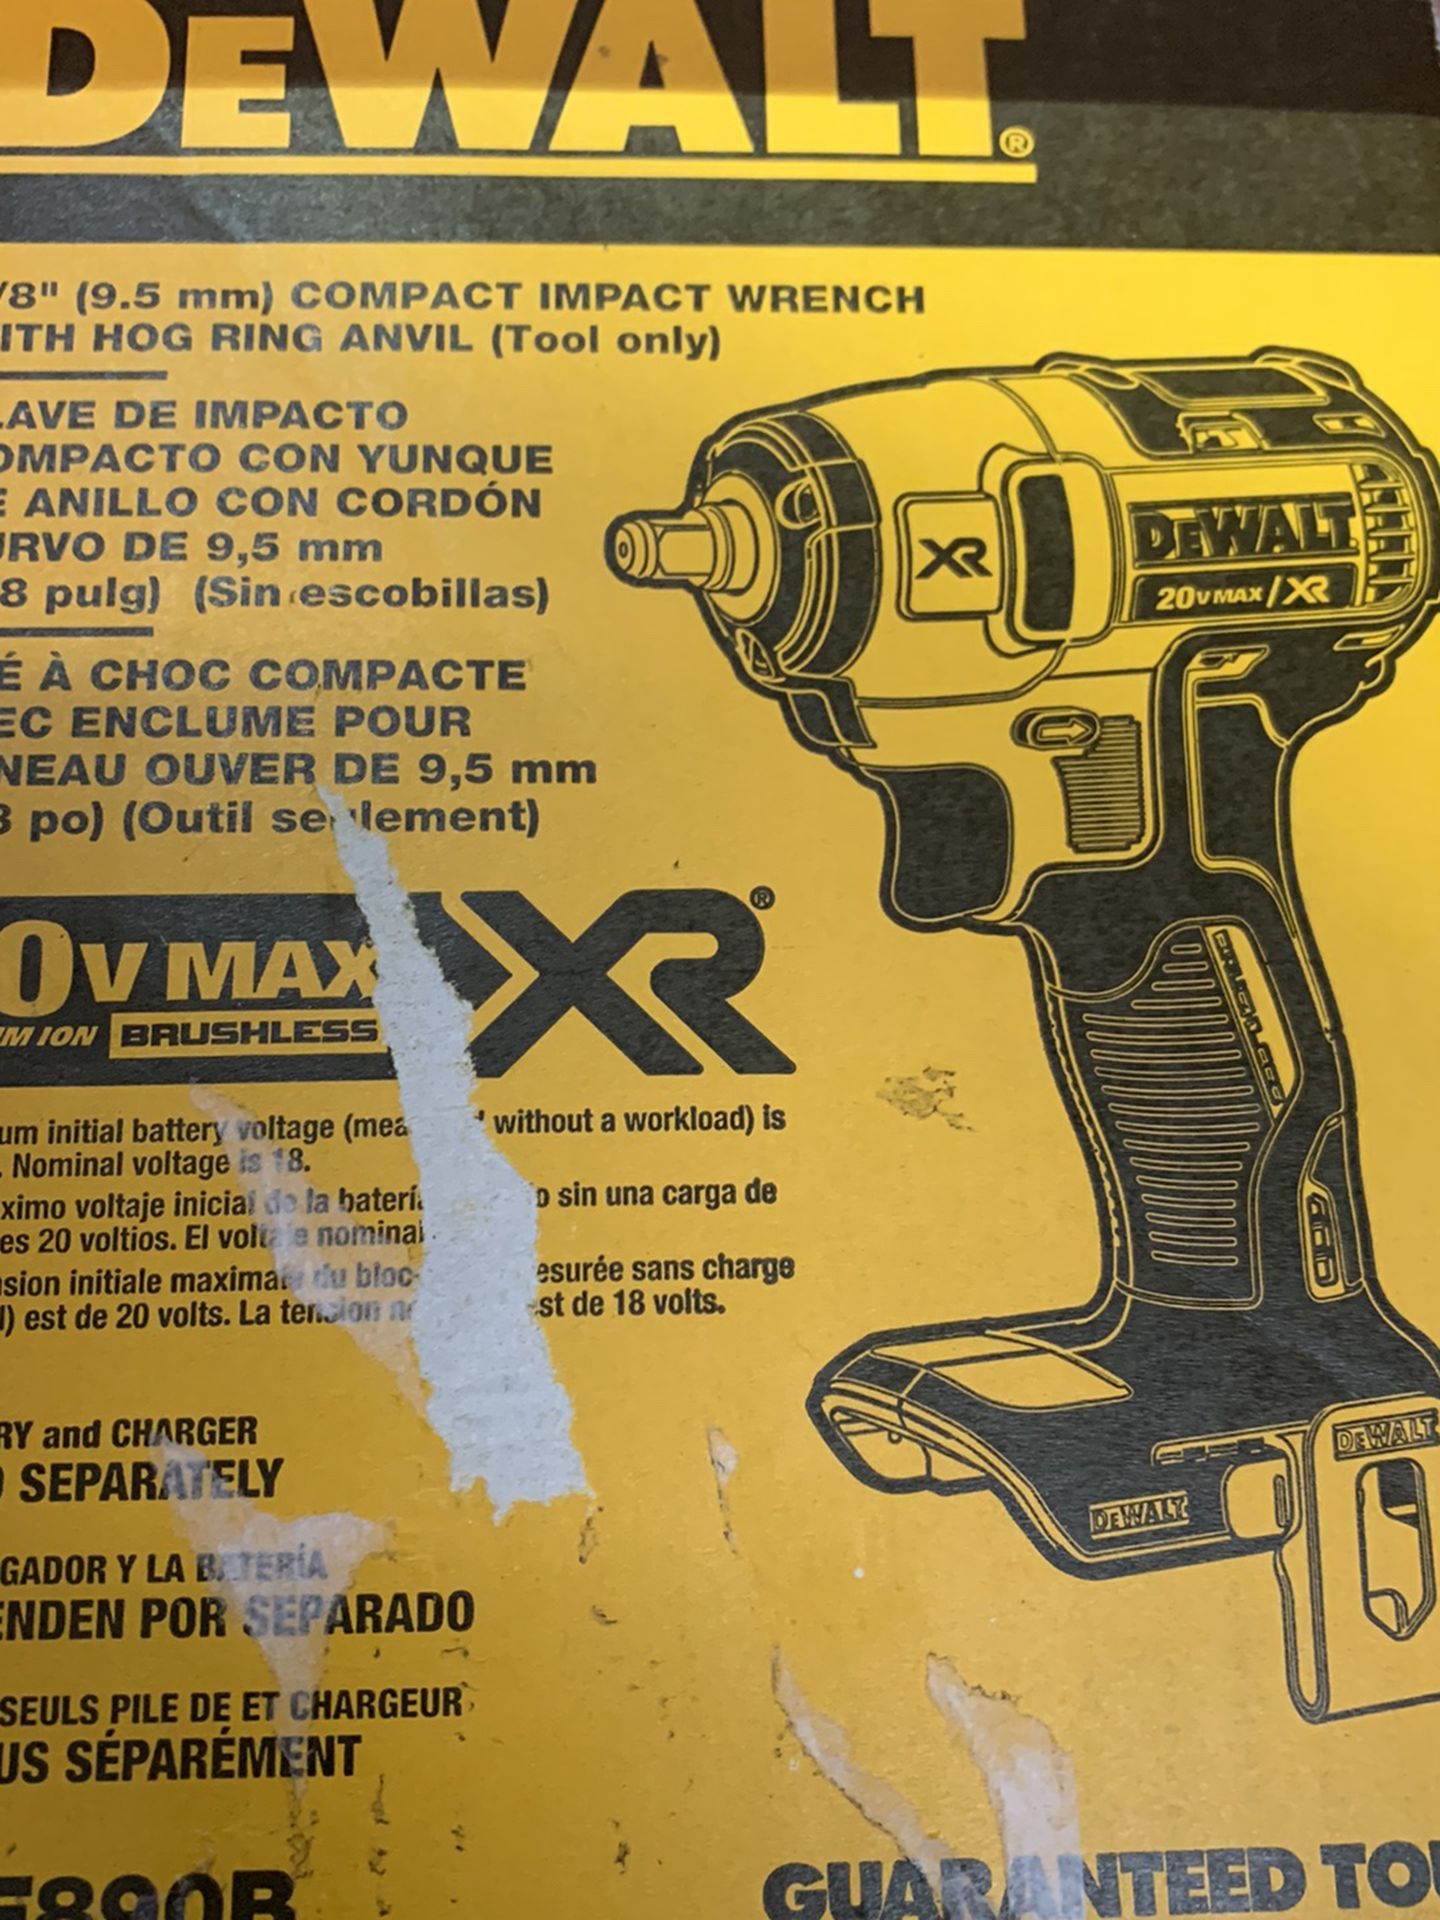 DEWALT XR 20-Volt Max Variable Speed Brushless Drive Cordless Impact Wrench